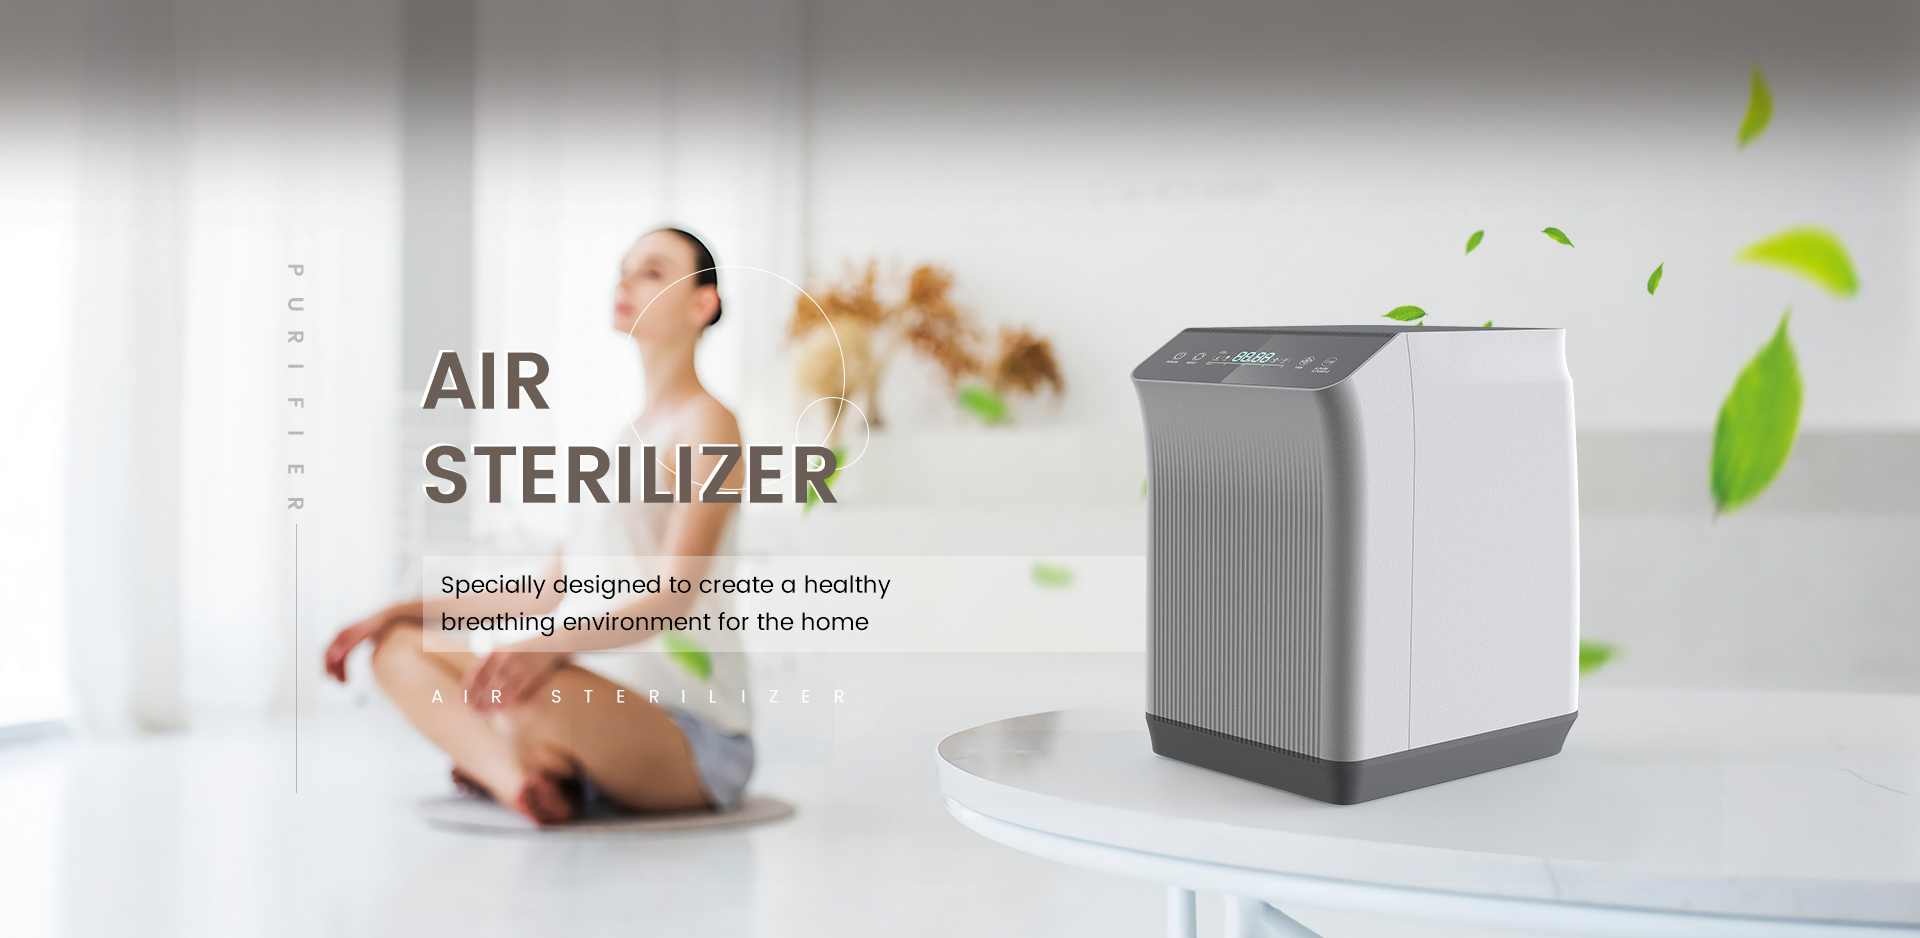 https://www.leeyoroto.com/f-air-purifier-sly-designed-to-create-a-healthy-breathing-environment-for-the-home-product/